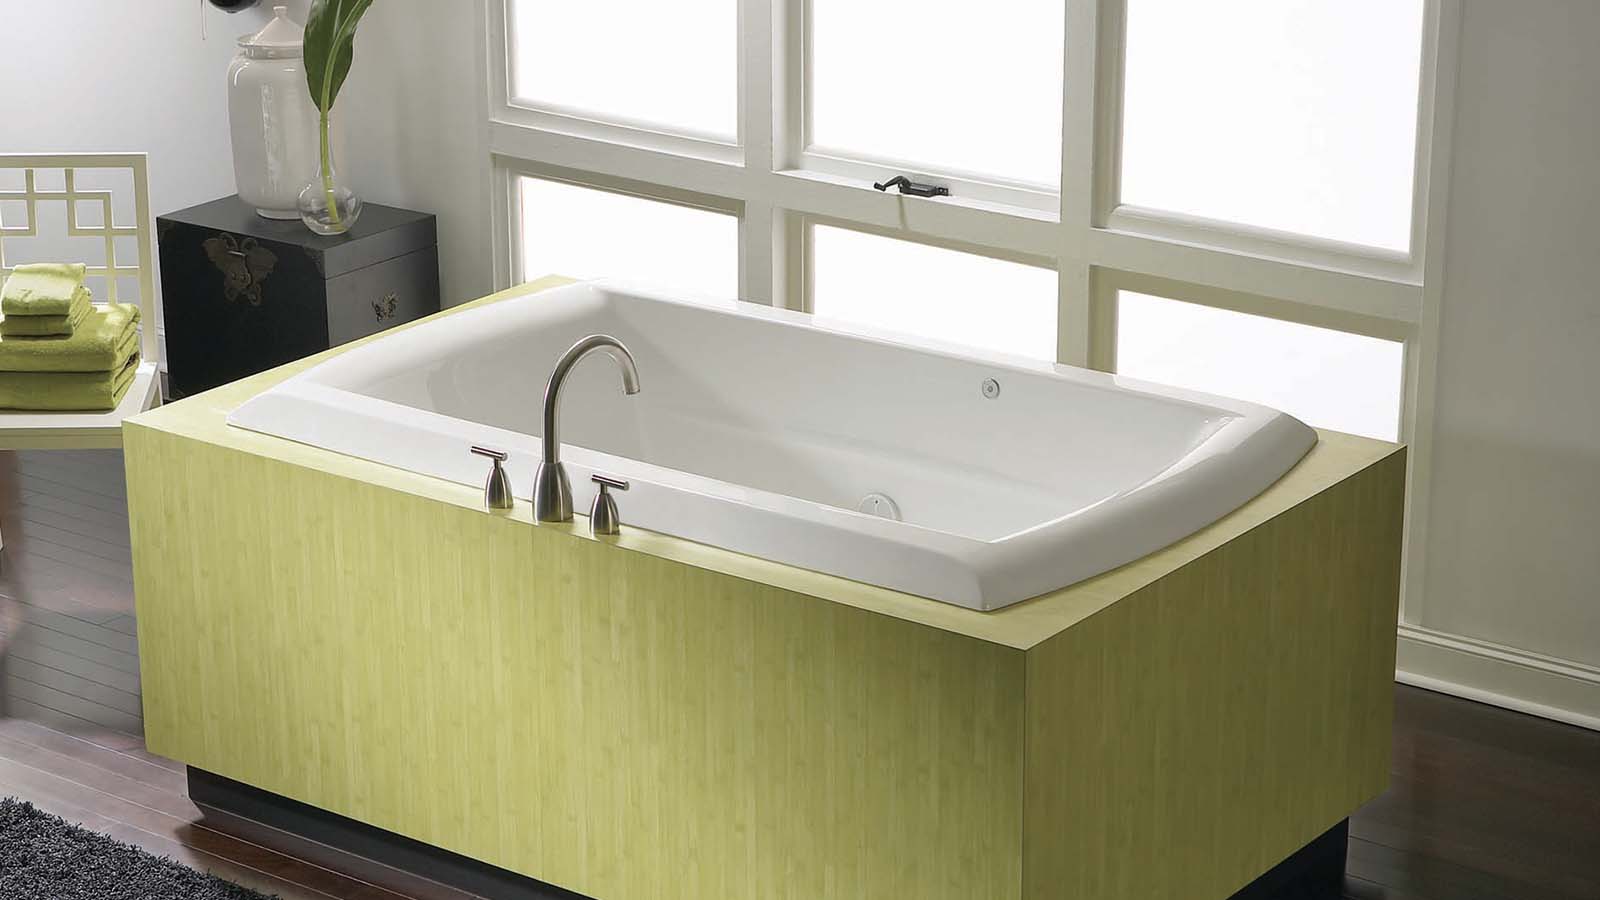 Image of a drop-in tub with a green frame skirt around it.